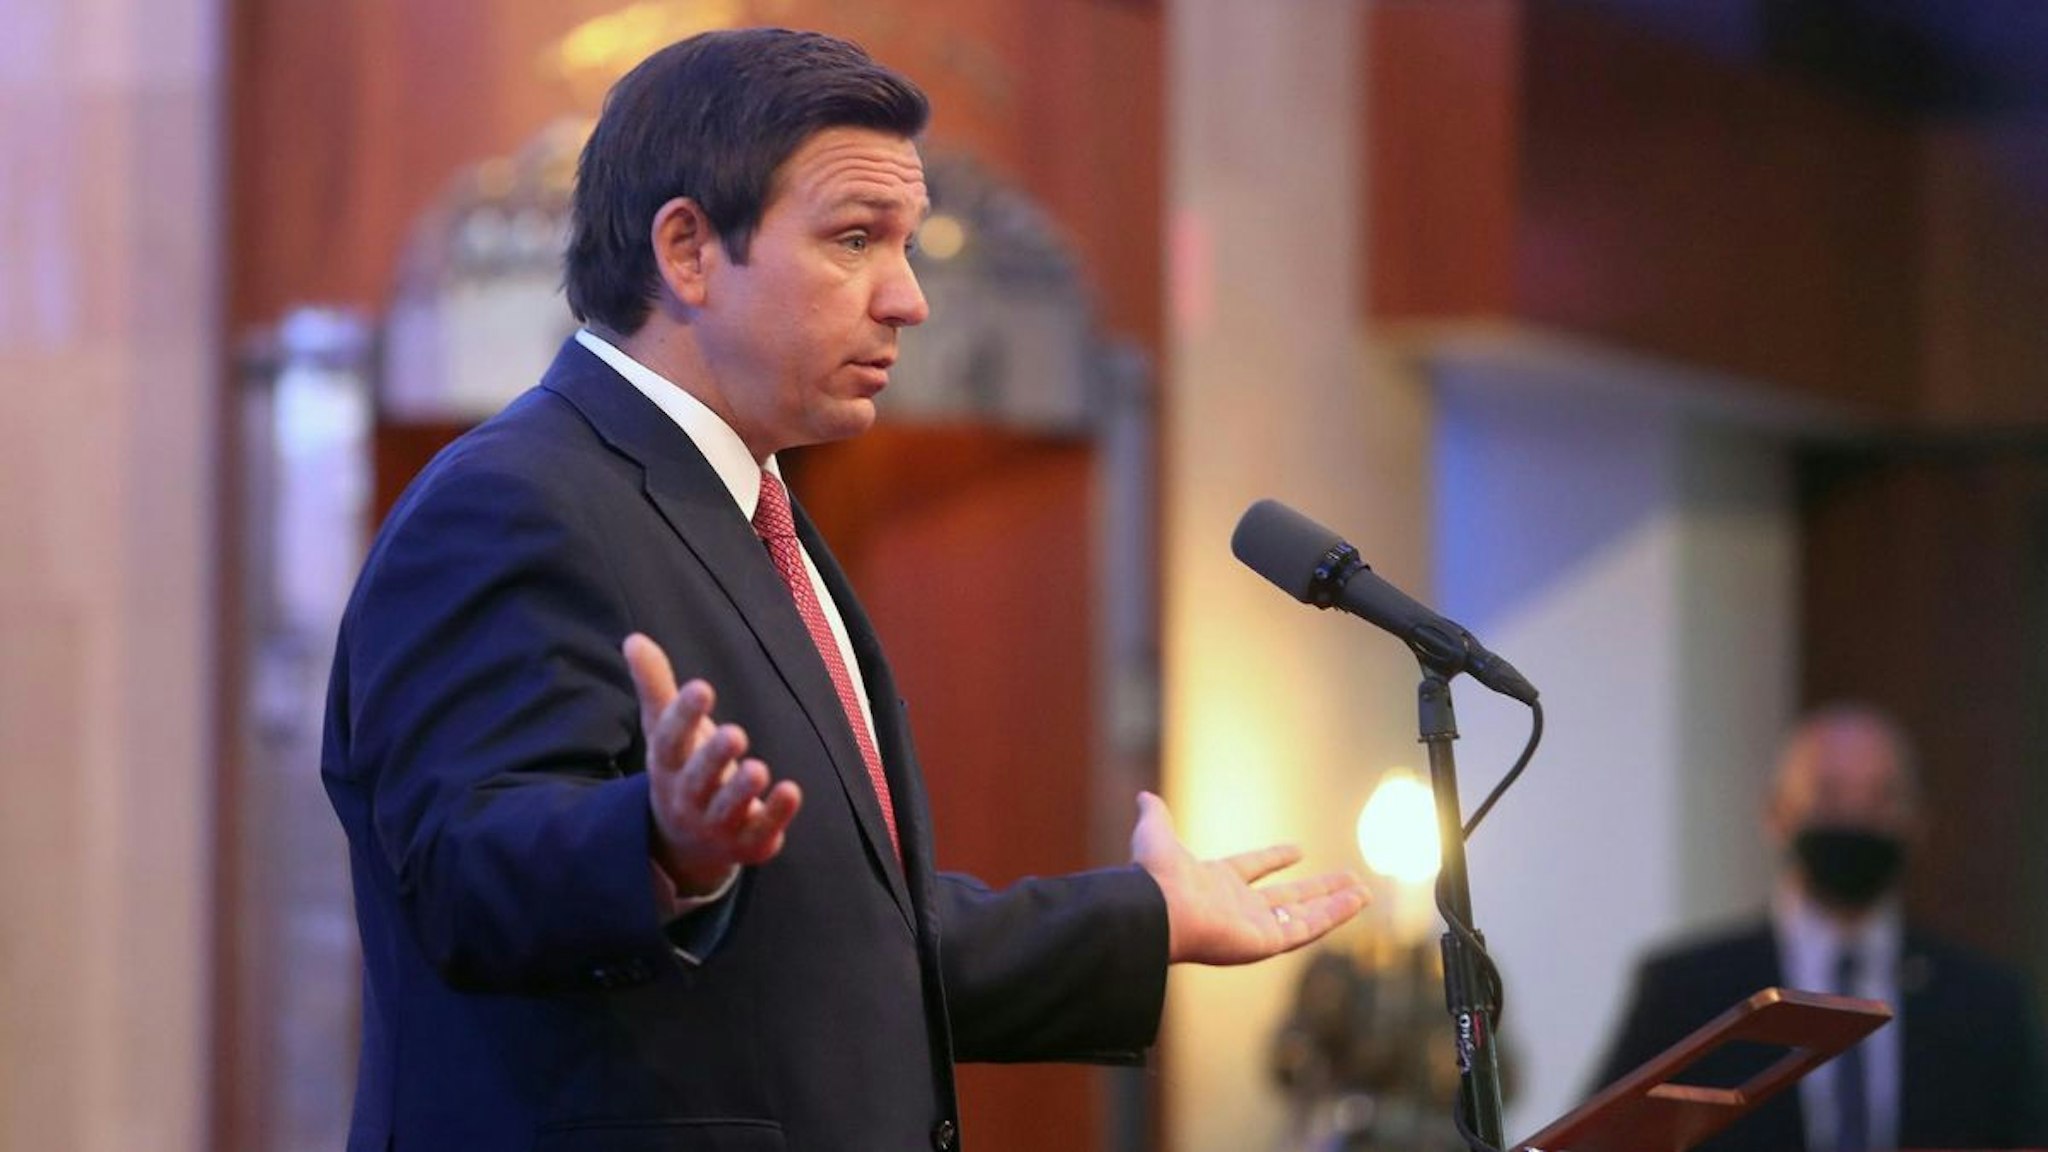 For Florida Republicans, the legislative session borrowed from an emotionally charged agenda set in part by Gov. Ron DeSantis, a potential presidential candidate for 2024, here at a COVID-19 vaccination drive on Feb. 4, 2021, in Aventura, Florida.